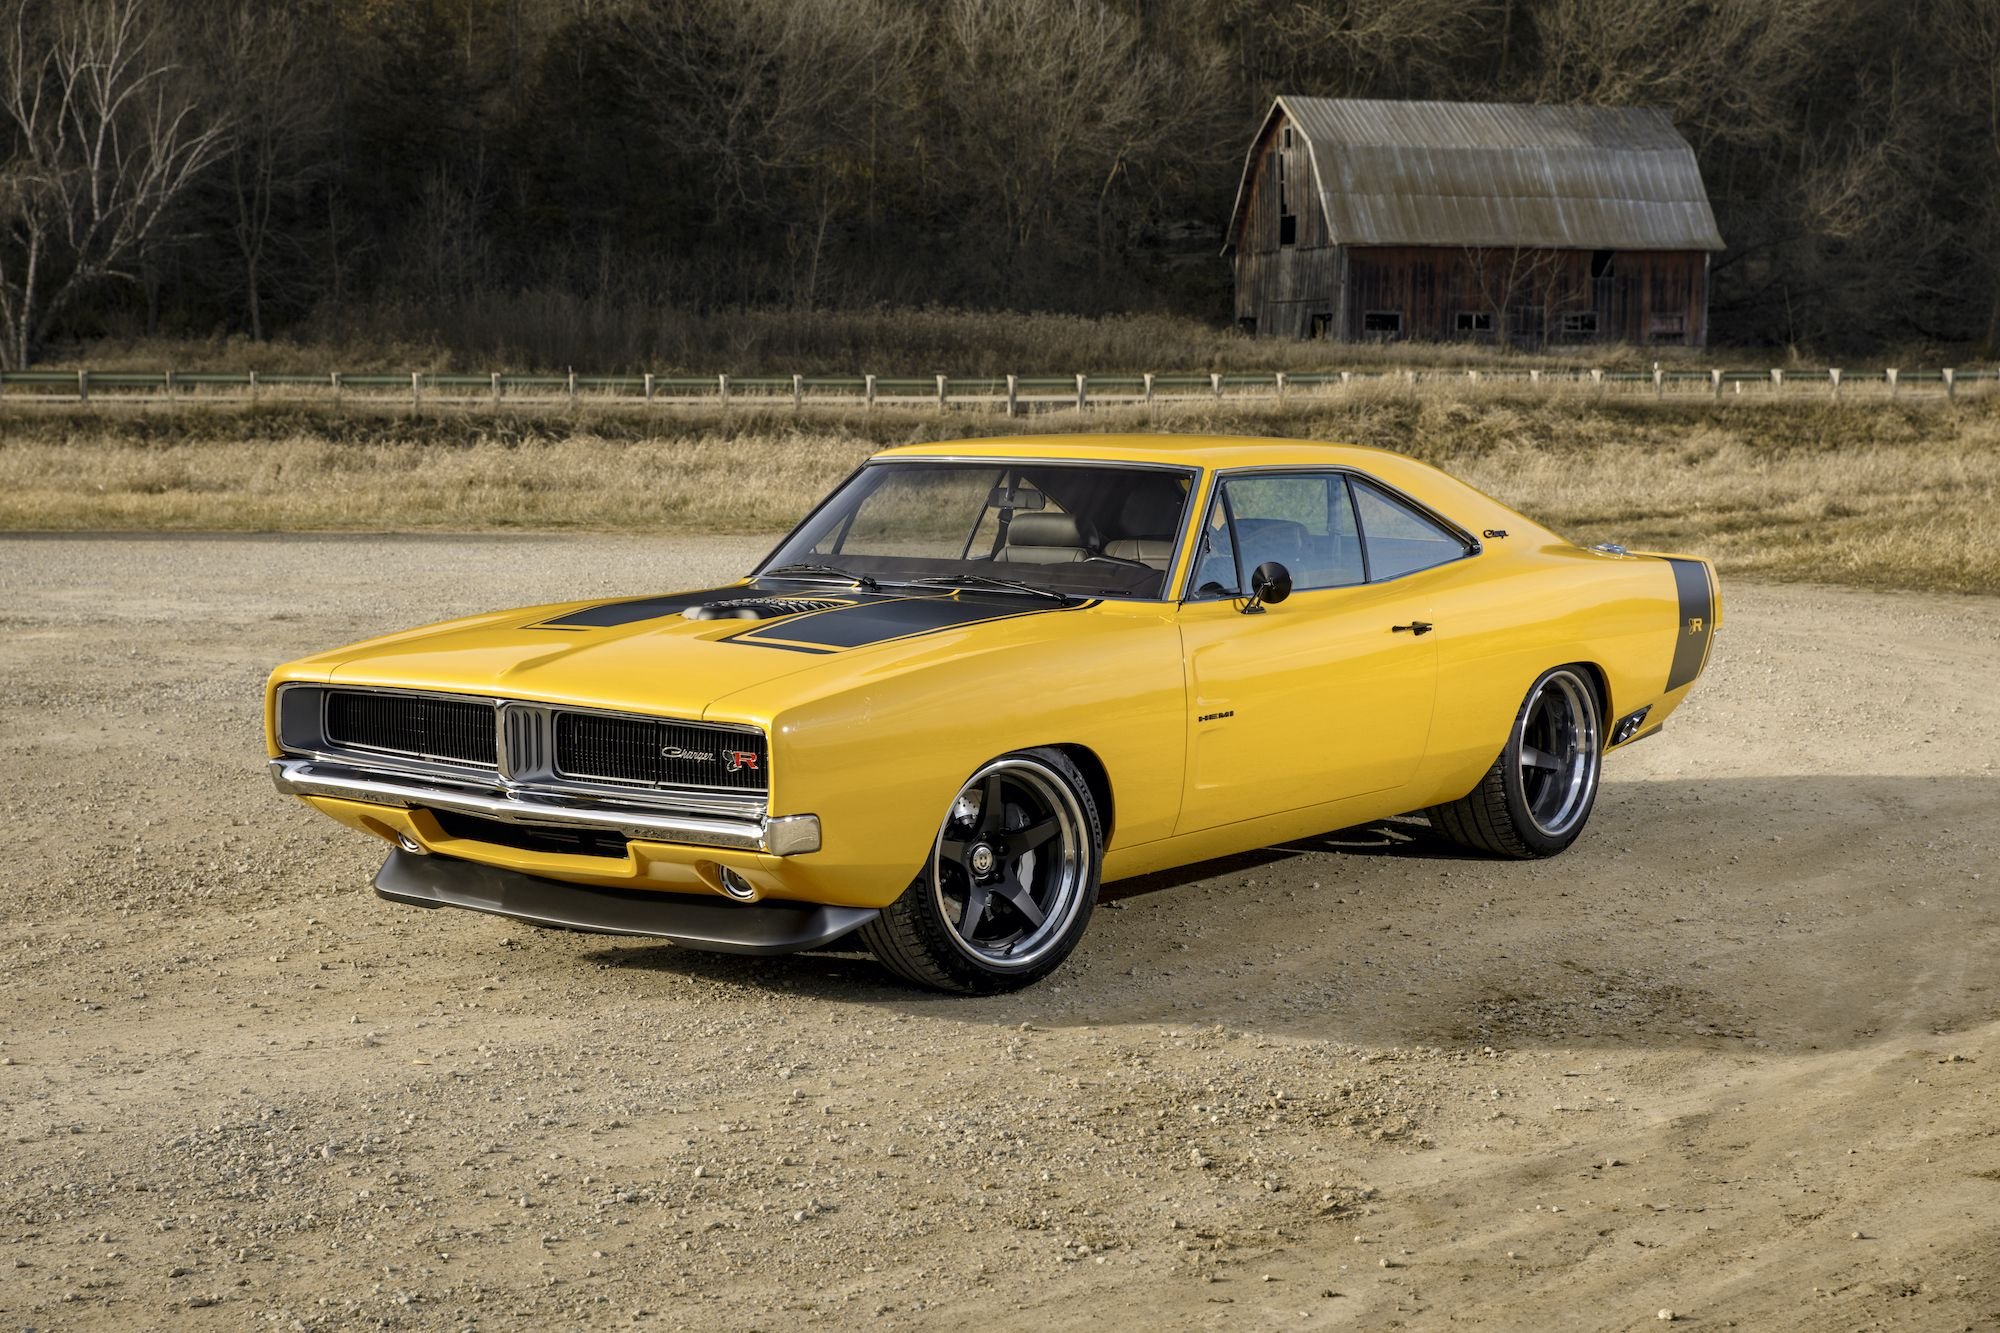 Ringbrothers 1969 Dodge Charger "CAPTIV" - Photos From Every Angle